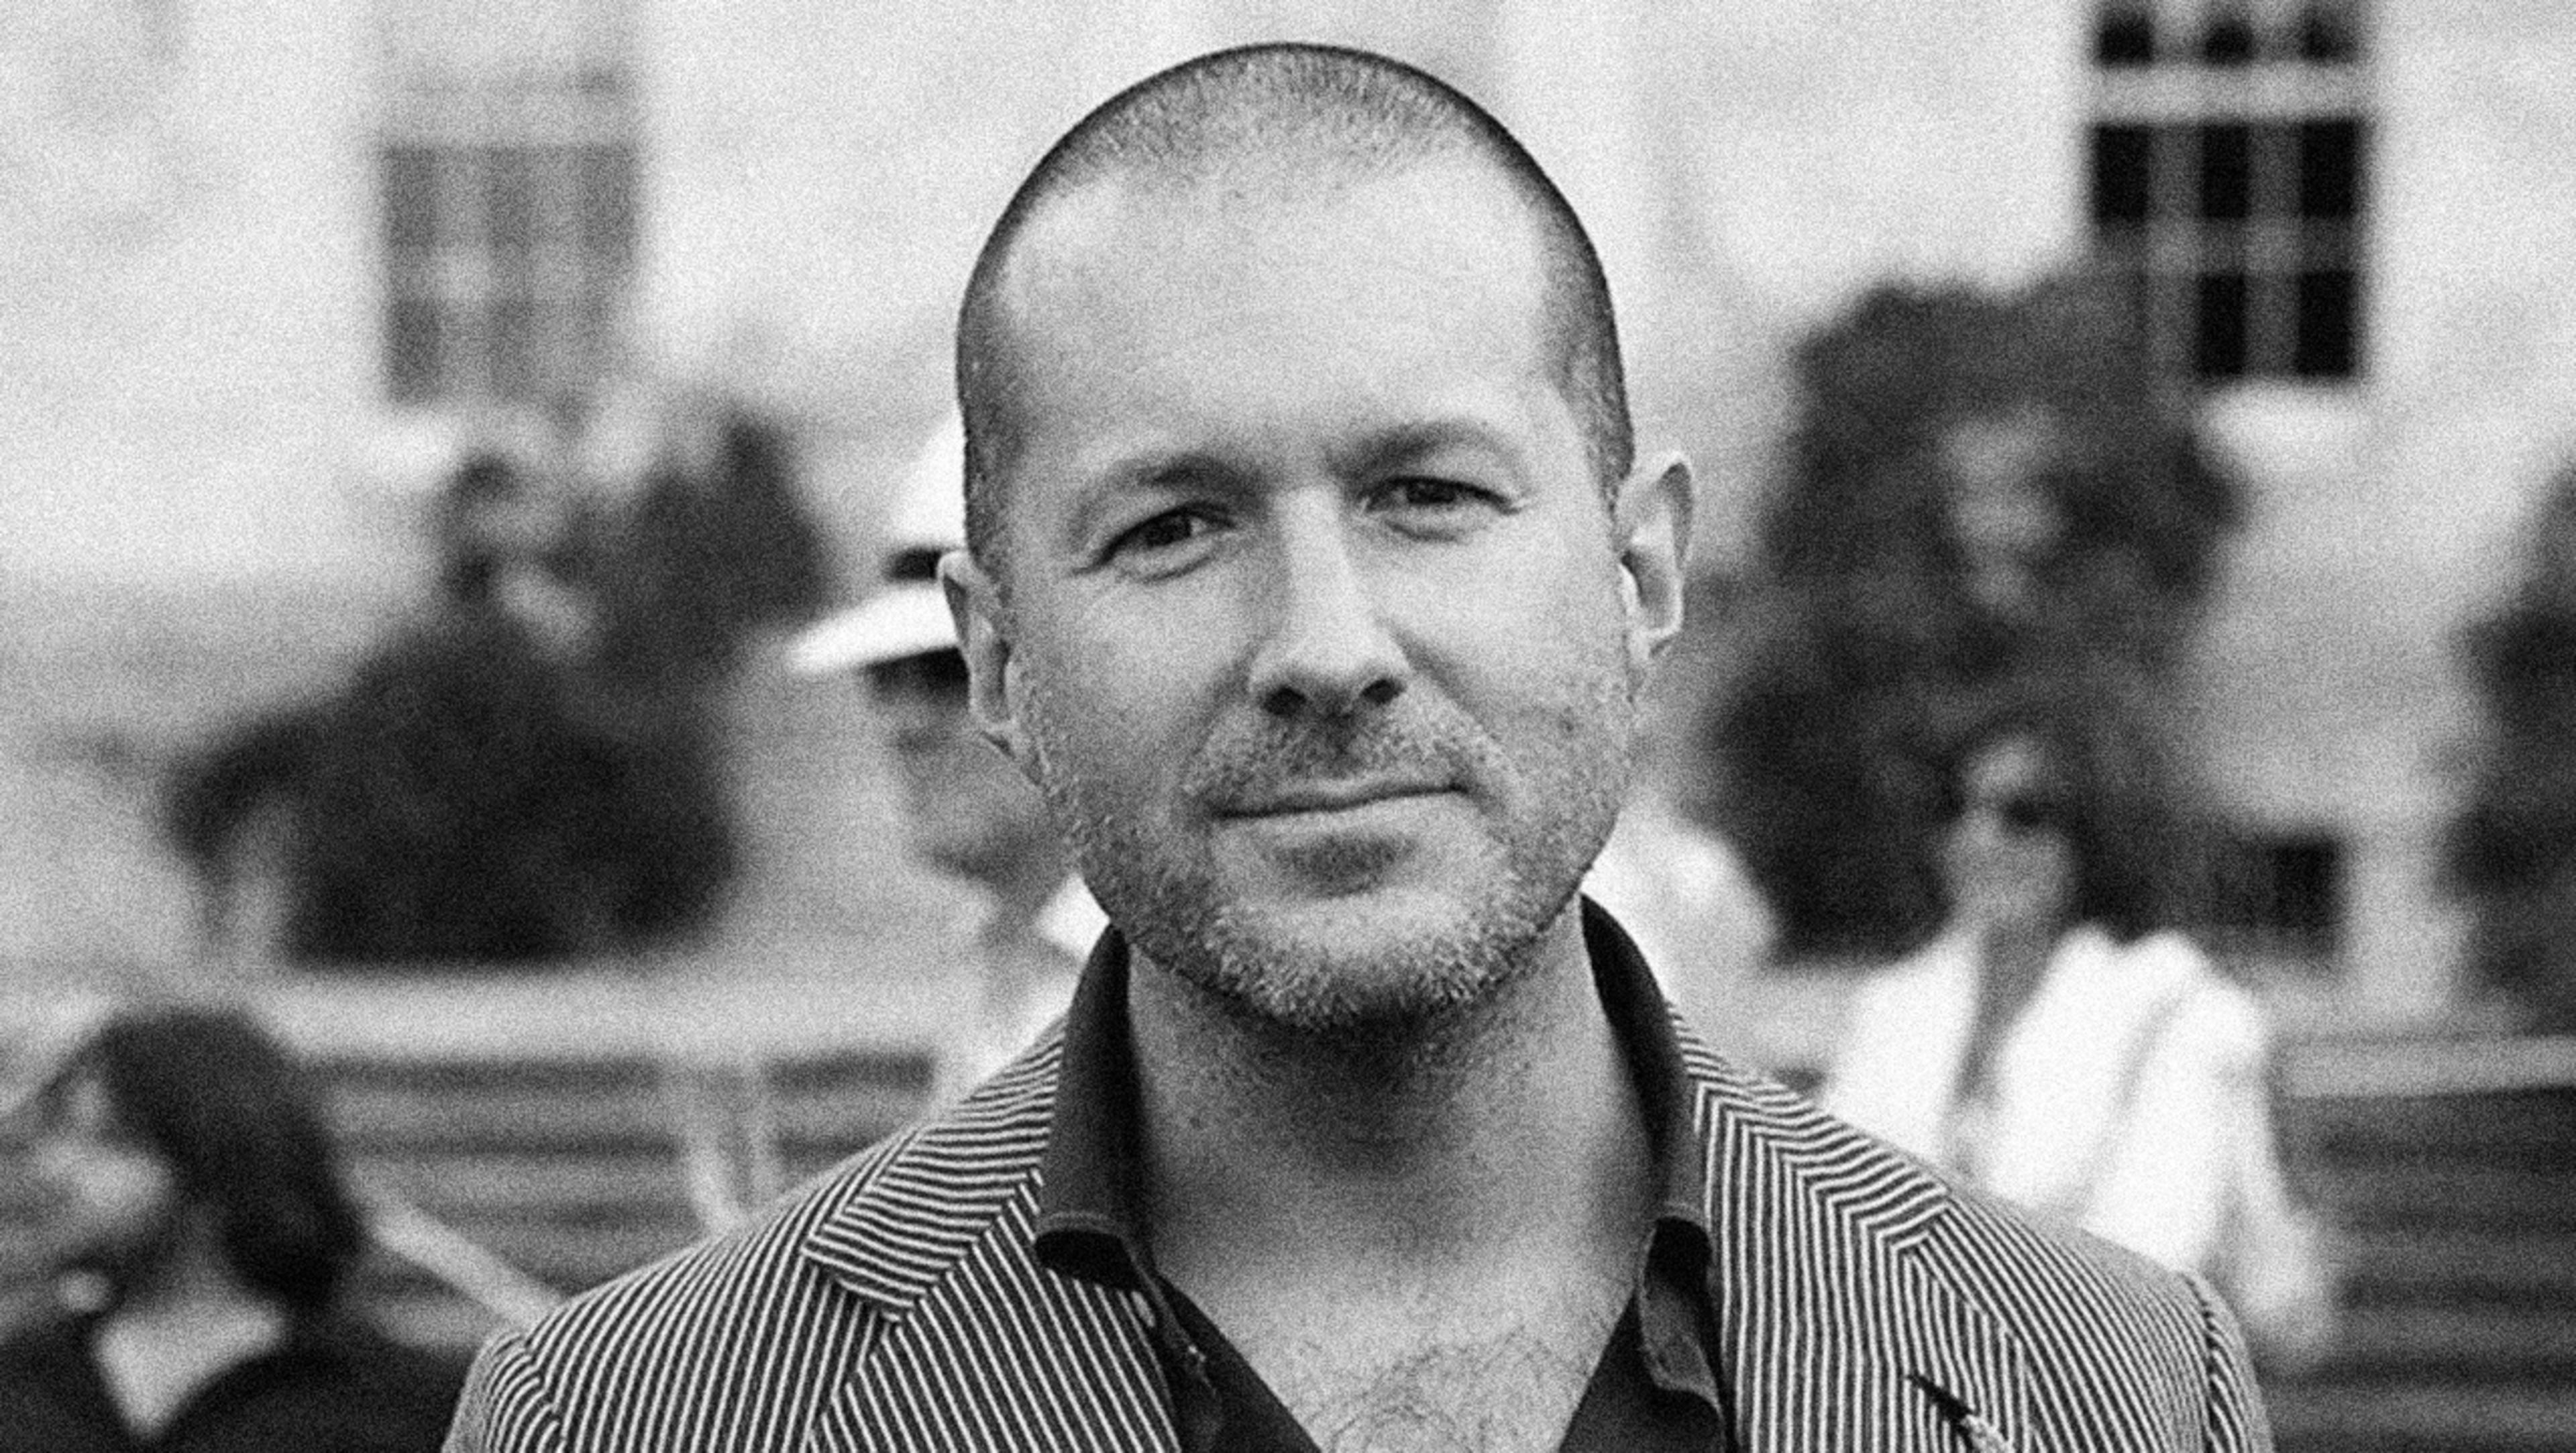 Jony Ive has gone from designing iPhones to diamond rings